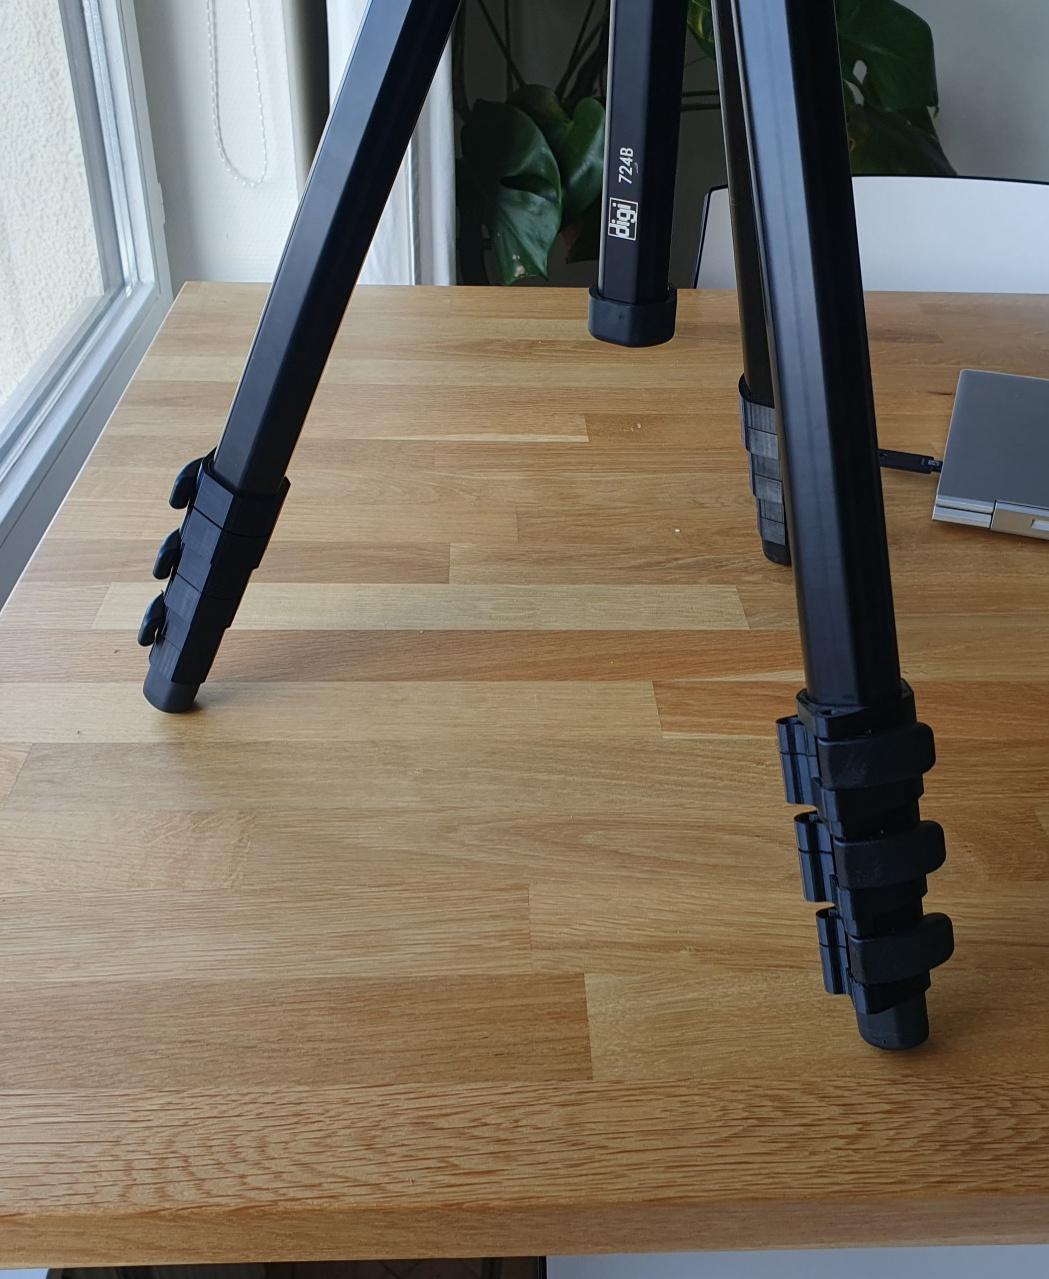 Manfrotto R328.01, R328.03, R328.05 Leg Clamp - Thank you so much! You brought my tripod back to life. 
Still waiting for the black stainless steel bolts from AliExpress to arrive.

I used a soldering iron to melt away the old clamps.  - 3d model